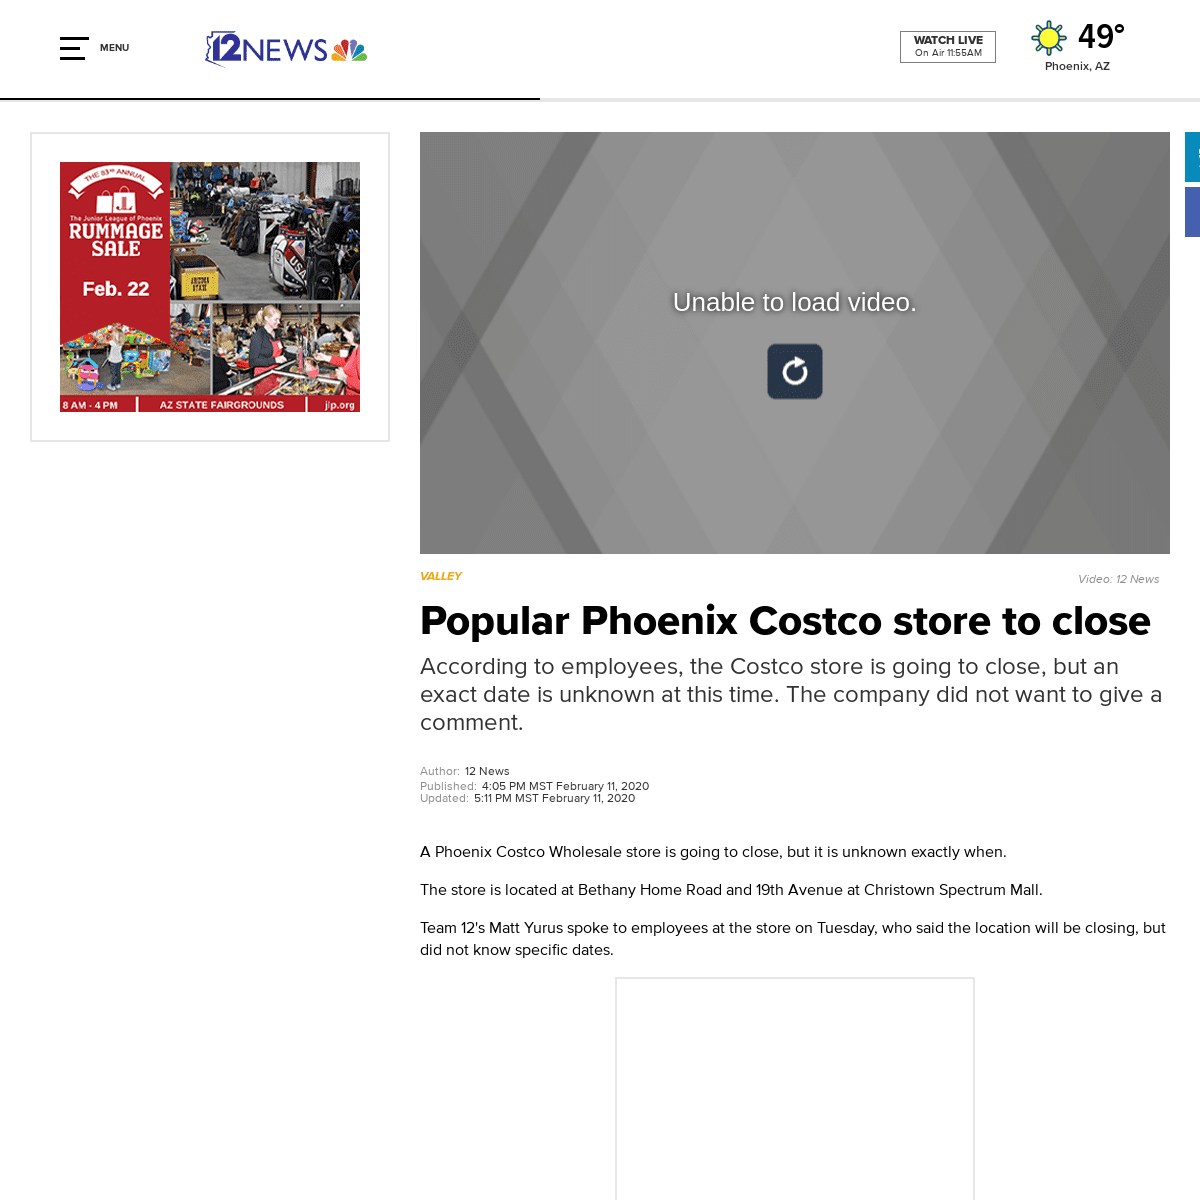 A complete backup of www.12news.com/article/news/local/valley/popular-phoenix-costco-store-to-close-company-confirms/75-38db85bd